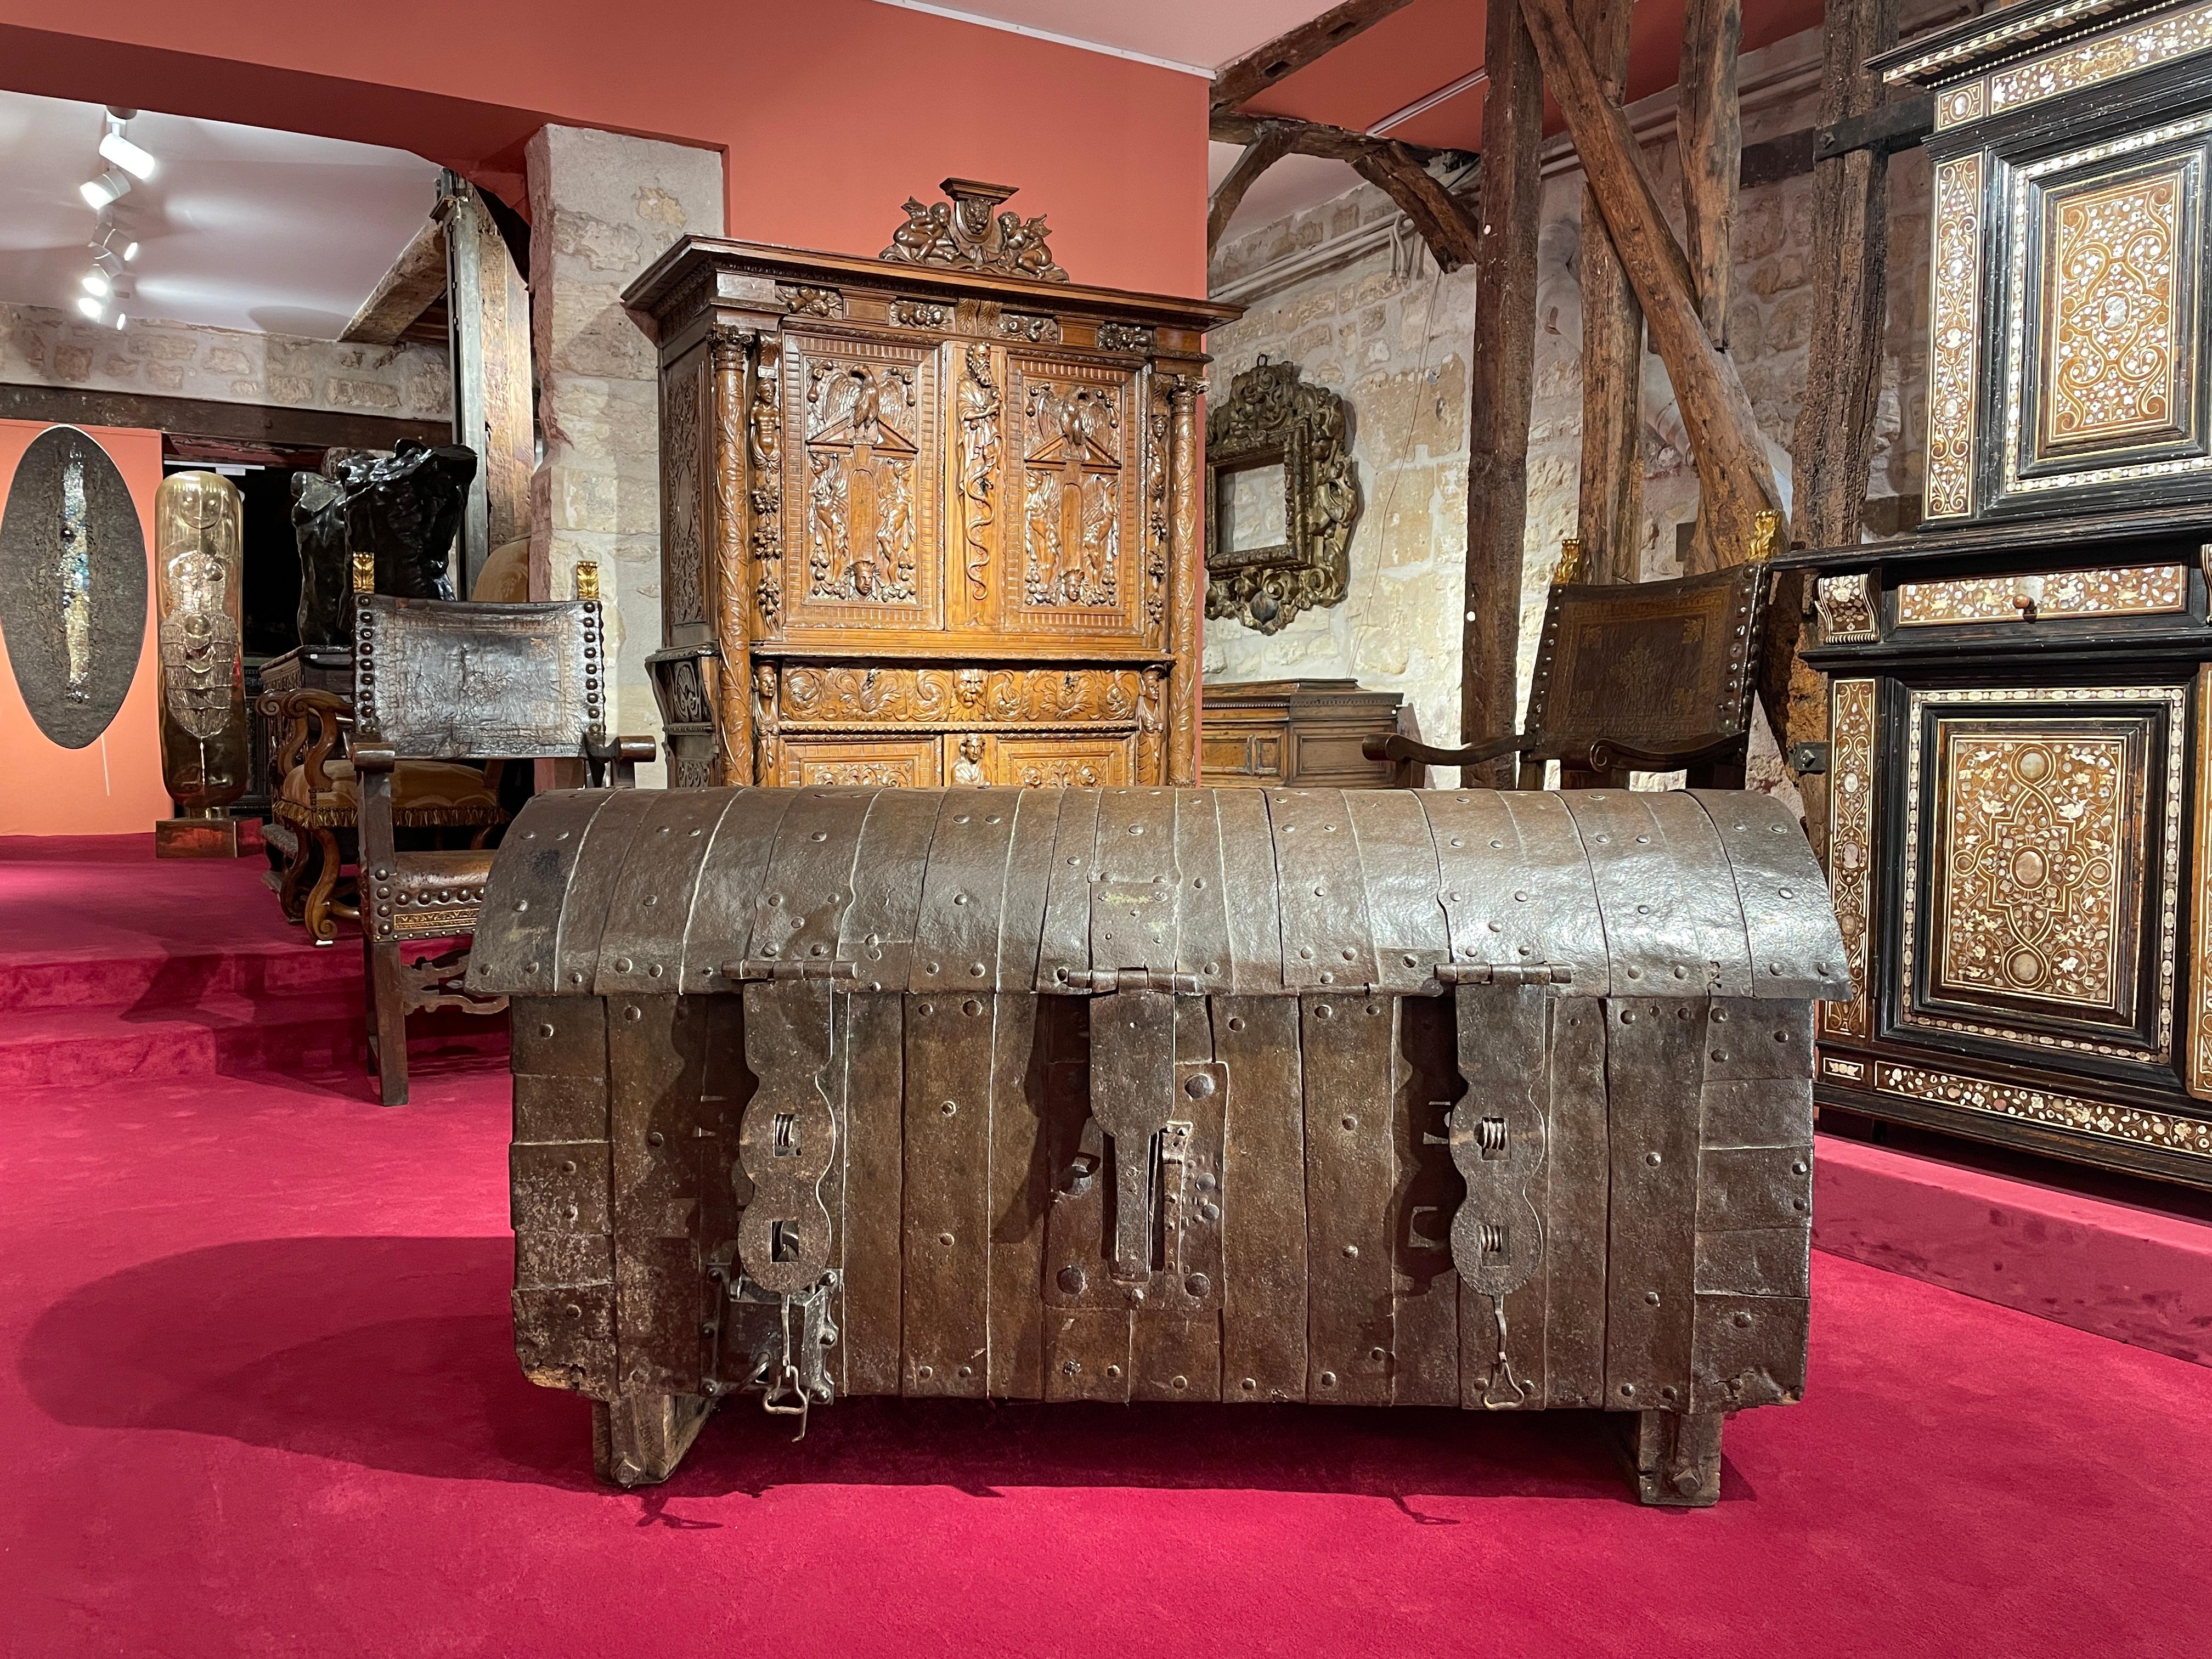 EXCEPTIONAL CATHEDRAL CHEST

ORIGIN: GERMANY
PERIOD: 15th CENTURY

Height : 77 cm
Length : 147 cm
Depth : 58 cm

Perfect state of preservation


This rare Gothic Cathedral Chest with curved lid has a wooden core of oak mesh inside. It is fully